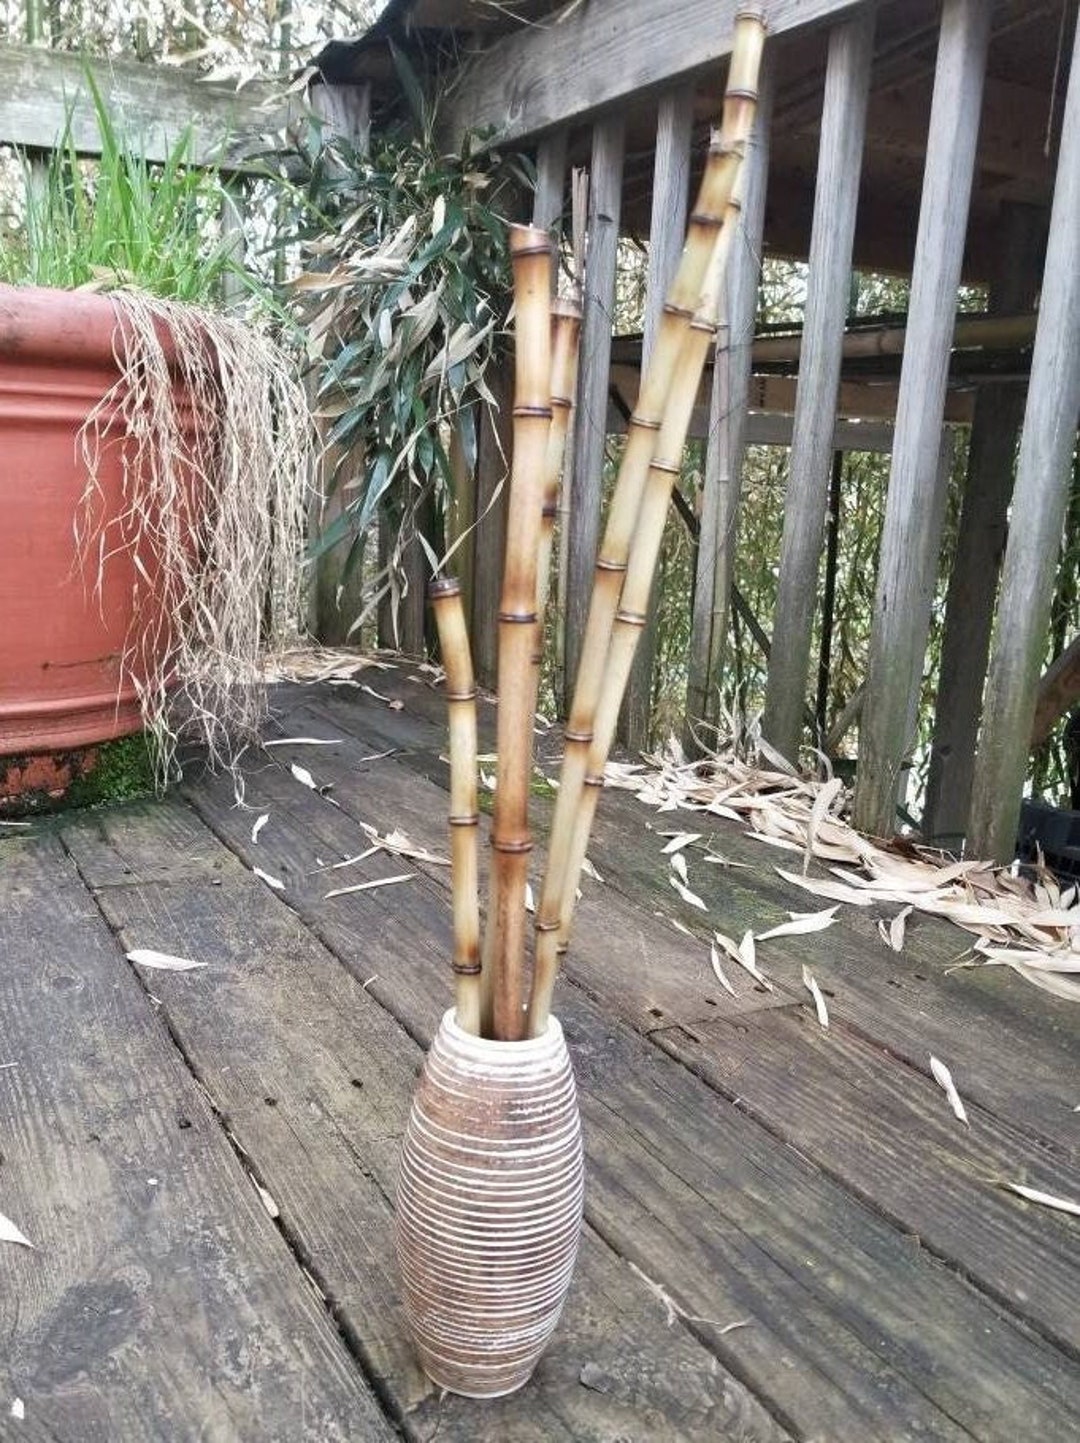 How to Make a Natural Stick Vase